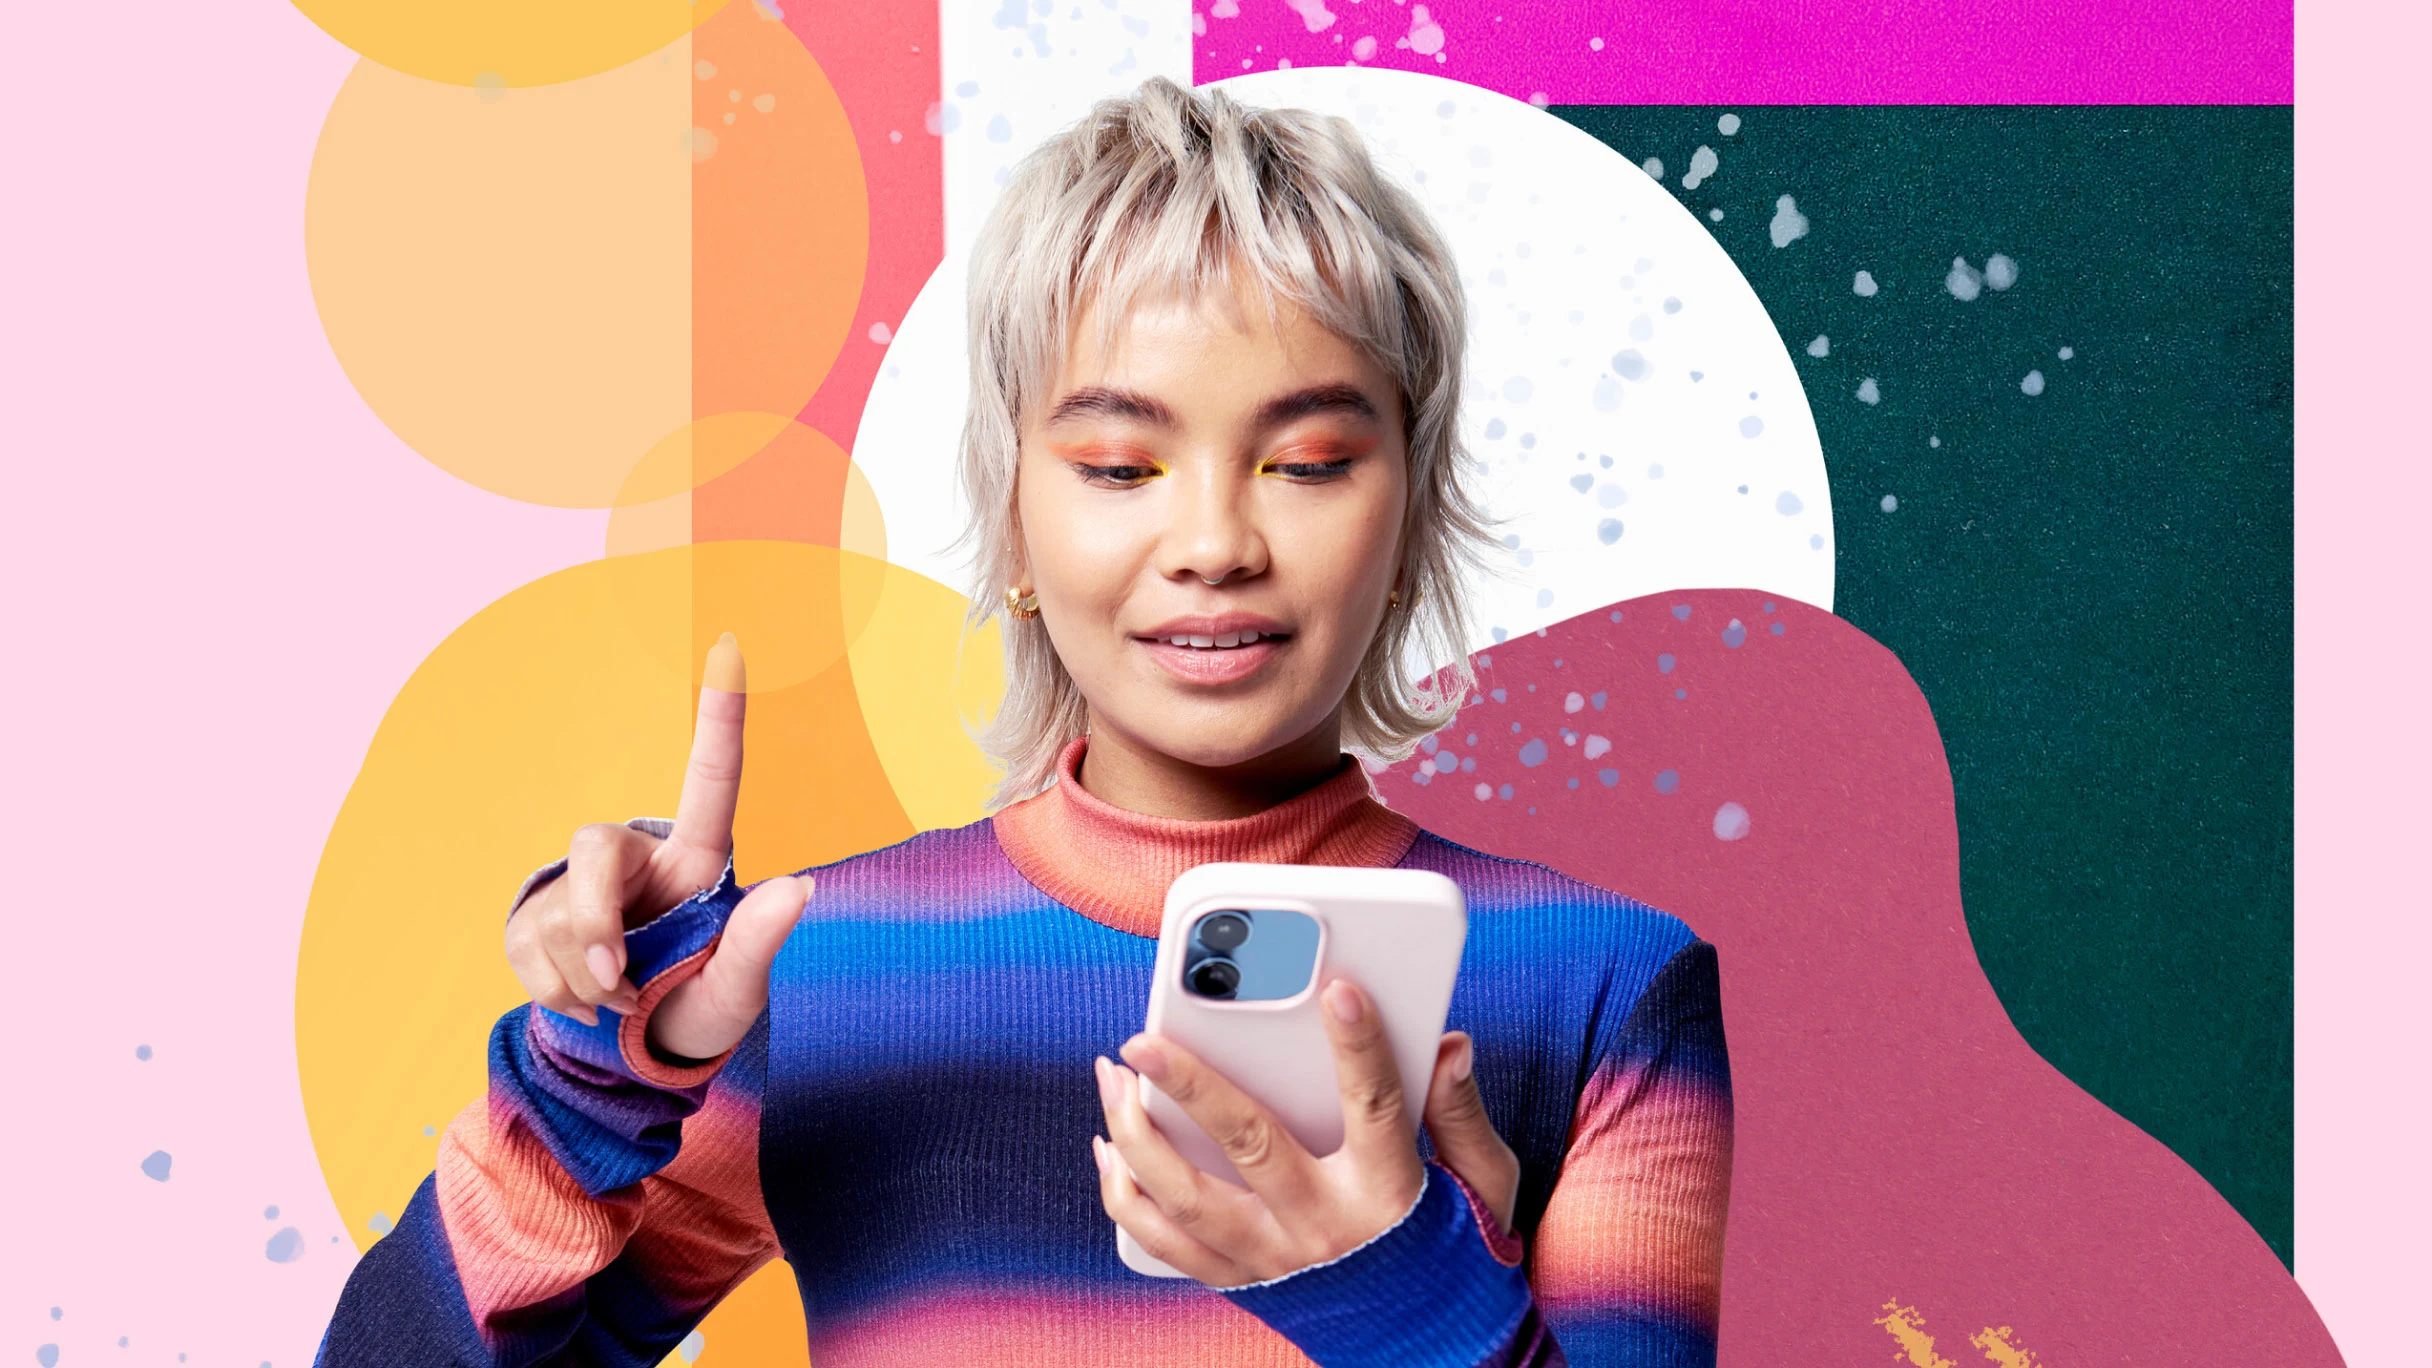 A woman with short blond hair in a bright striped shirt, holding and looking at her phone in one hand and point upwards with her other hand on a very colorful and abstract background.